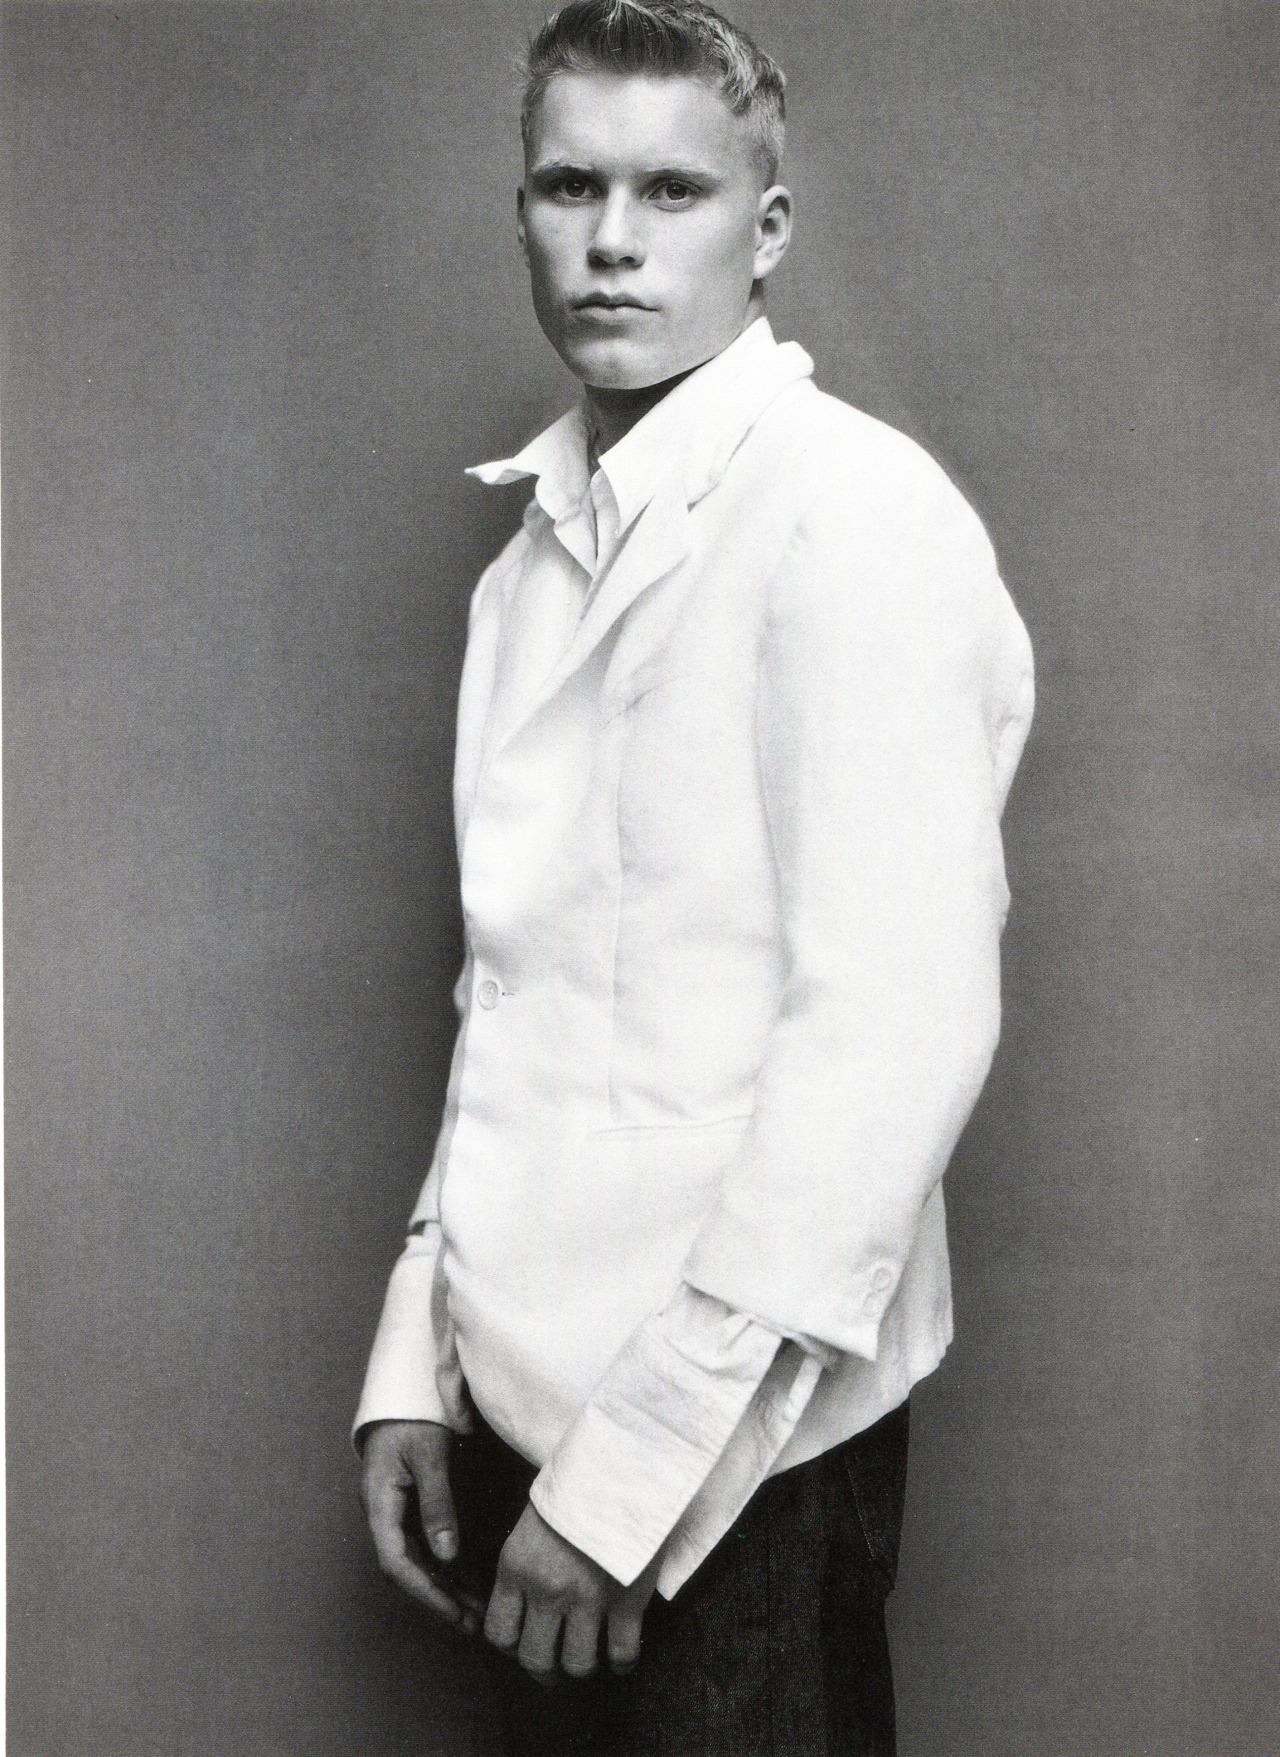 Paul Sinclaire | L'Uomo Vogue by Tom Munro | 4